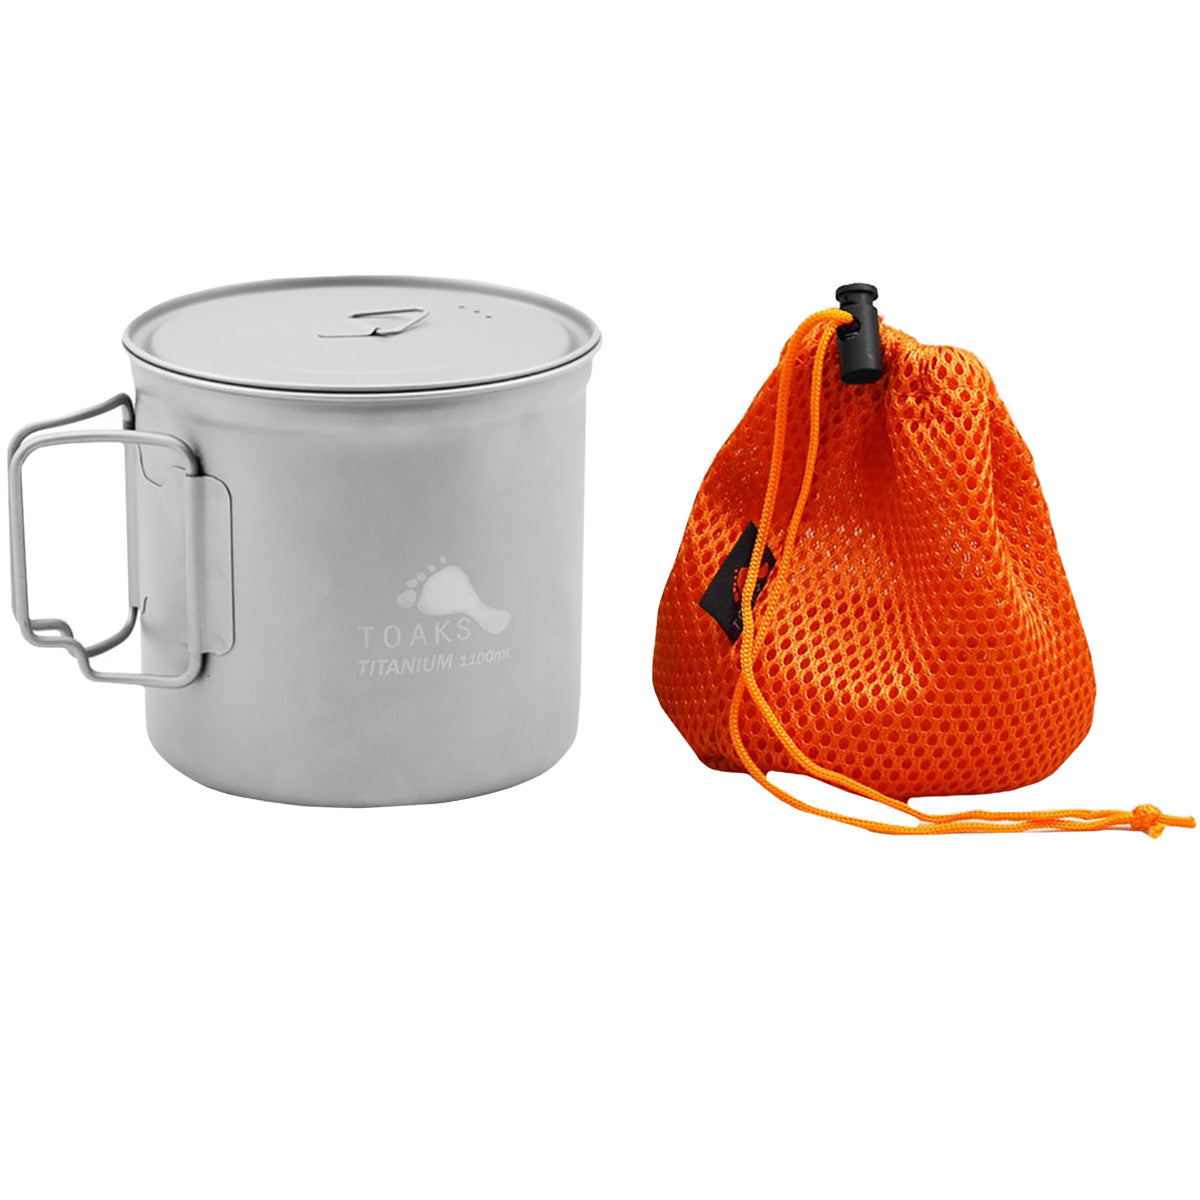 TOAKS Ultralight Titanium Camping Cook Pot with Foldable Handles and Lid-1100ml TOAKS